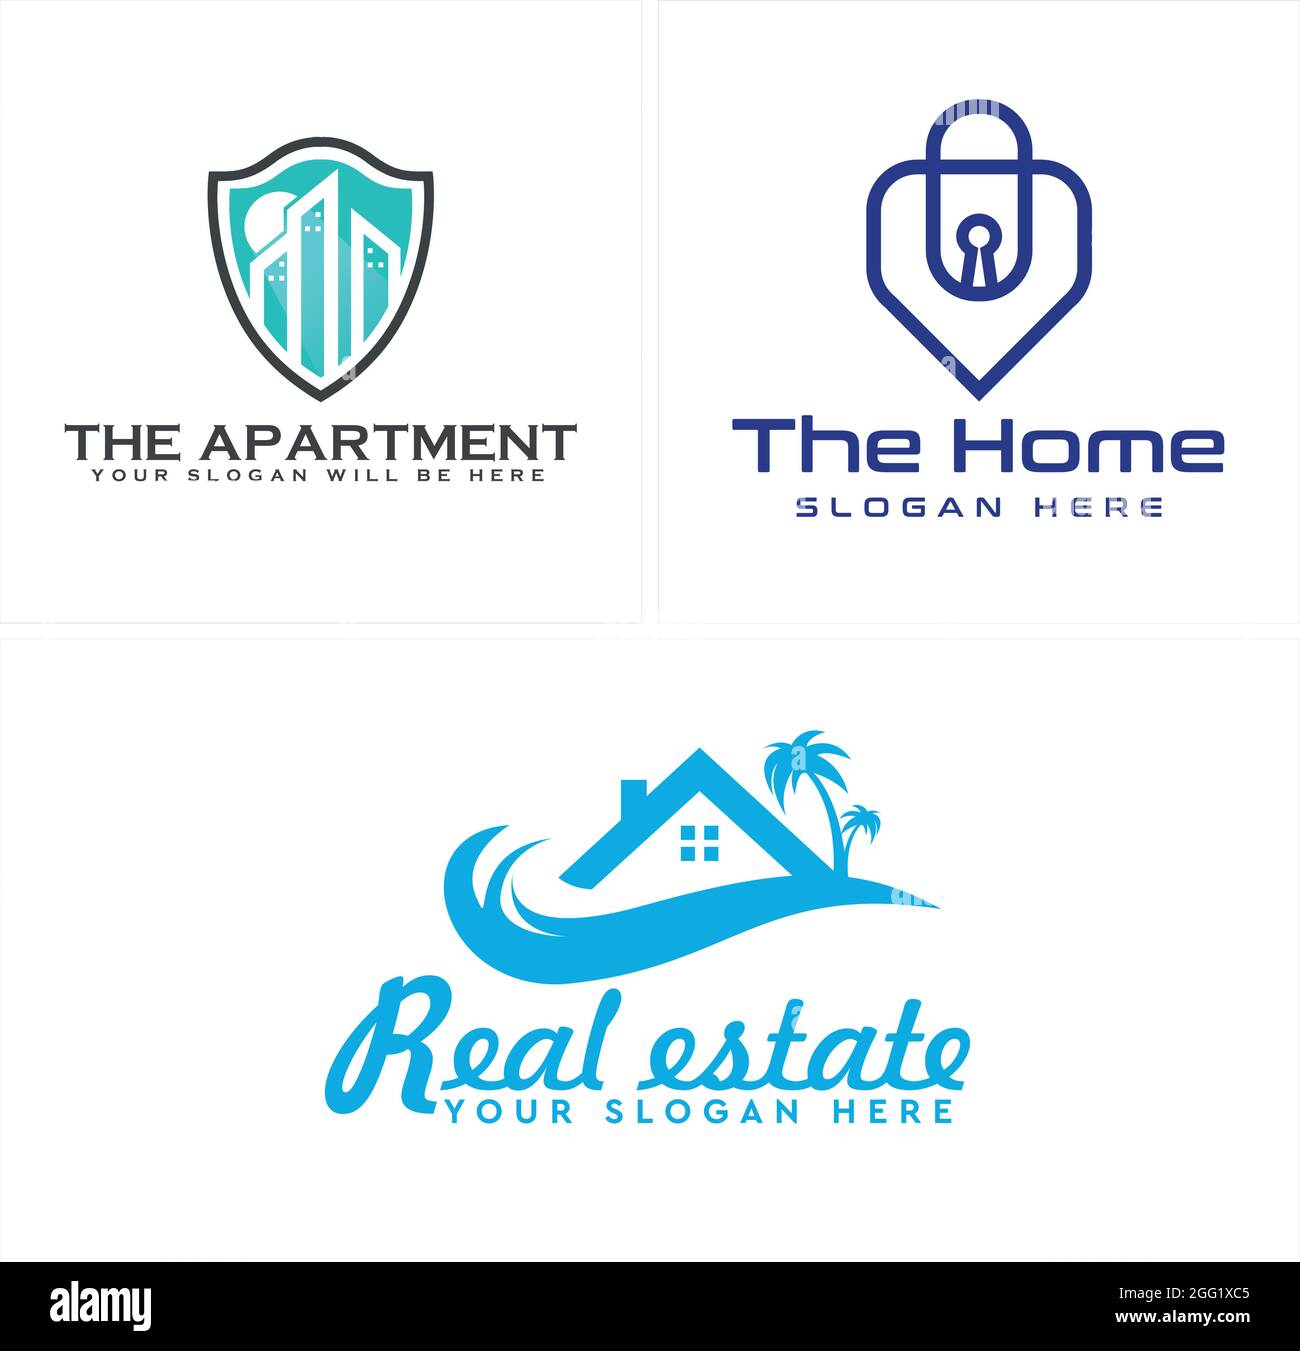 Real estate with shield home building icon line vector logo Stock Vector